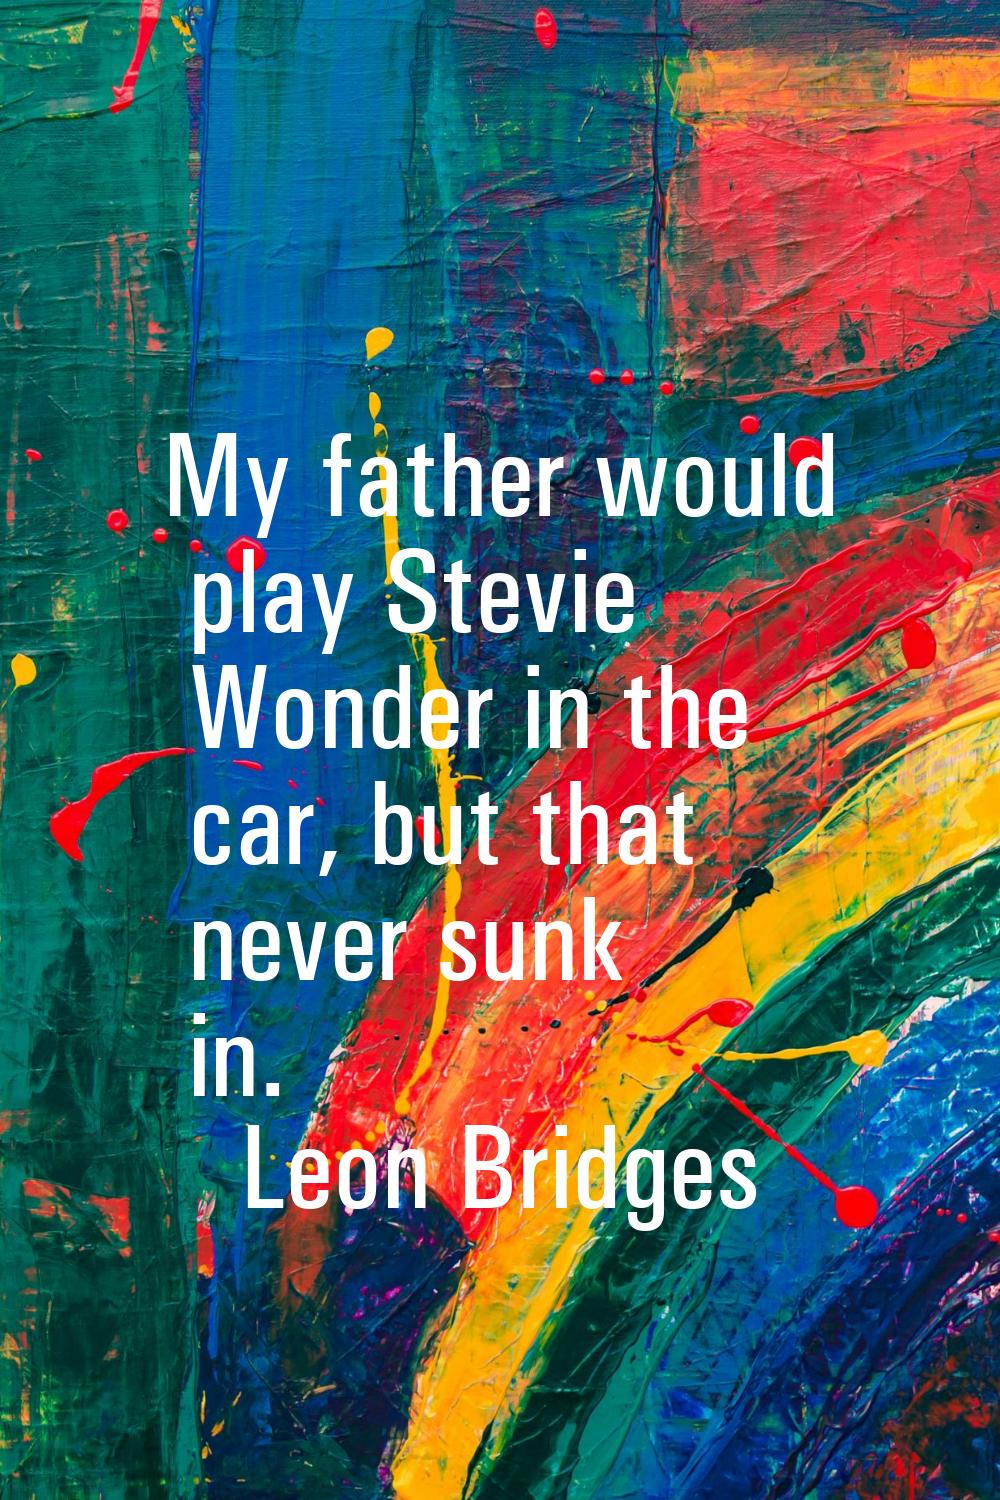 My father would play Stevie Wonder in the car, but that never sunk in.